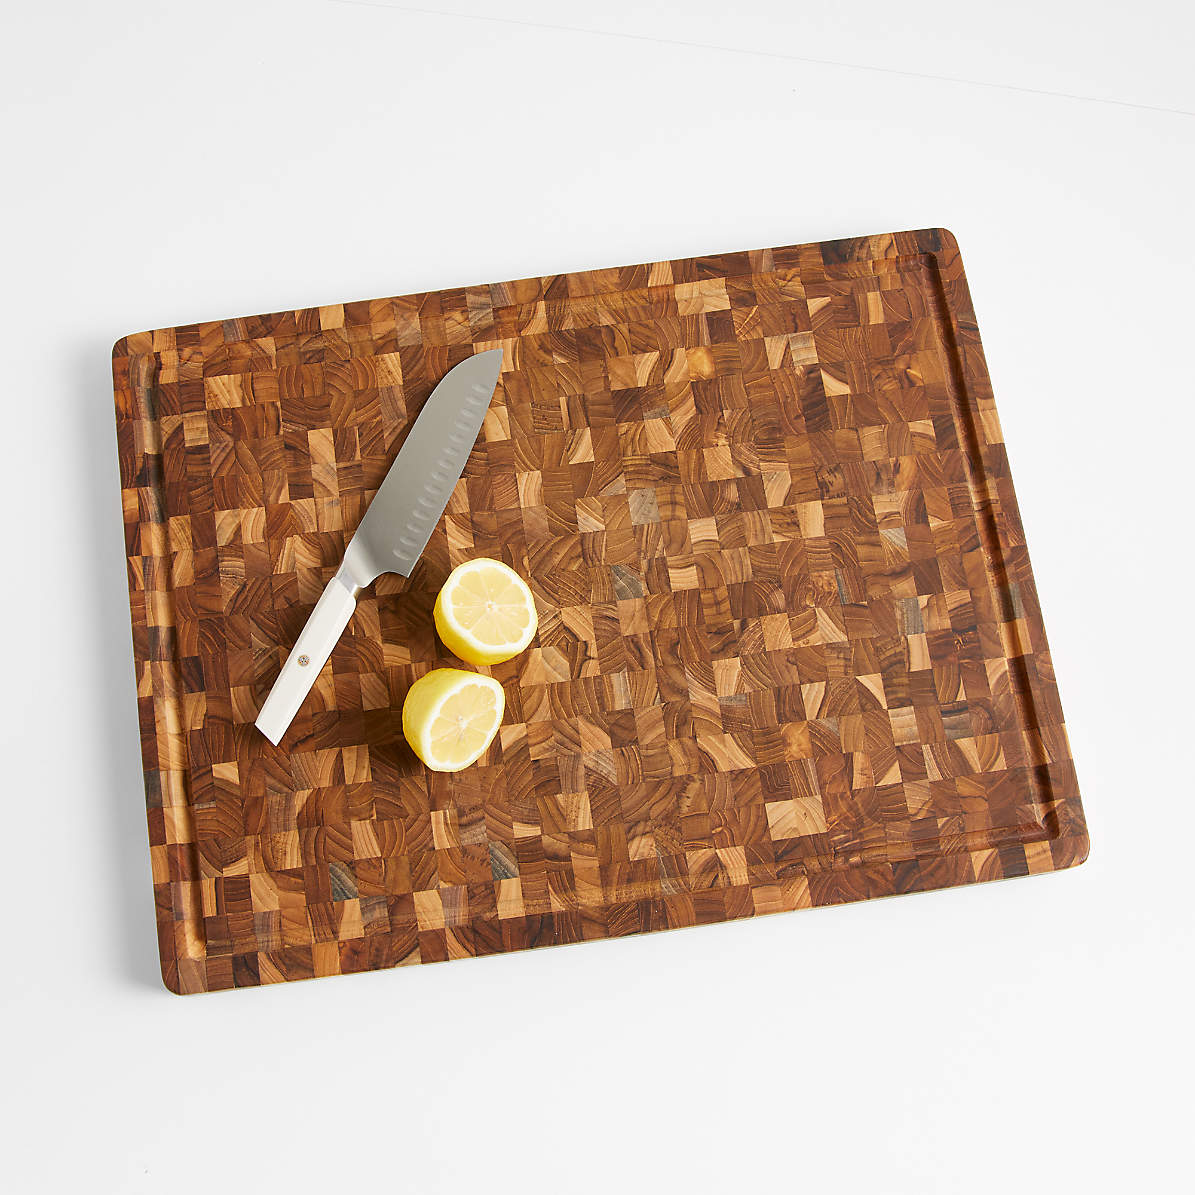 Teakhaus End-Grain Cutting Board/Serving Board with Juice Canal 24